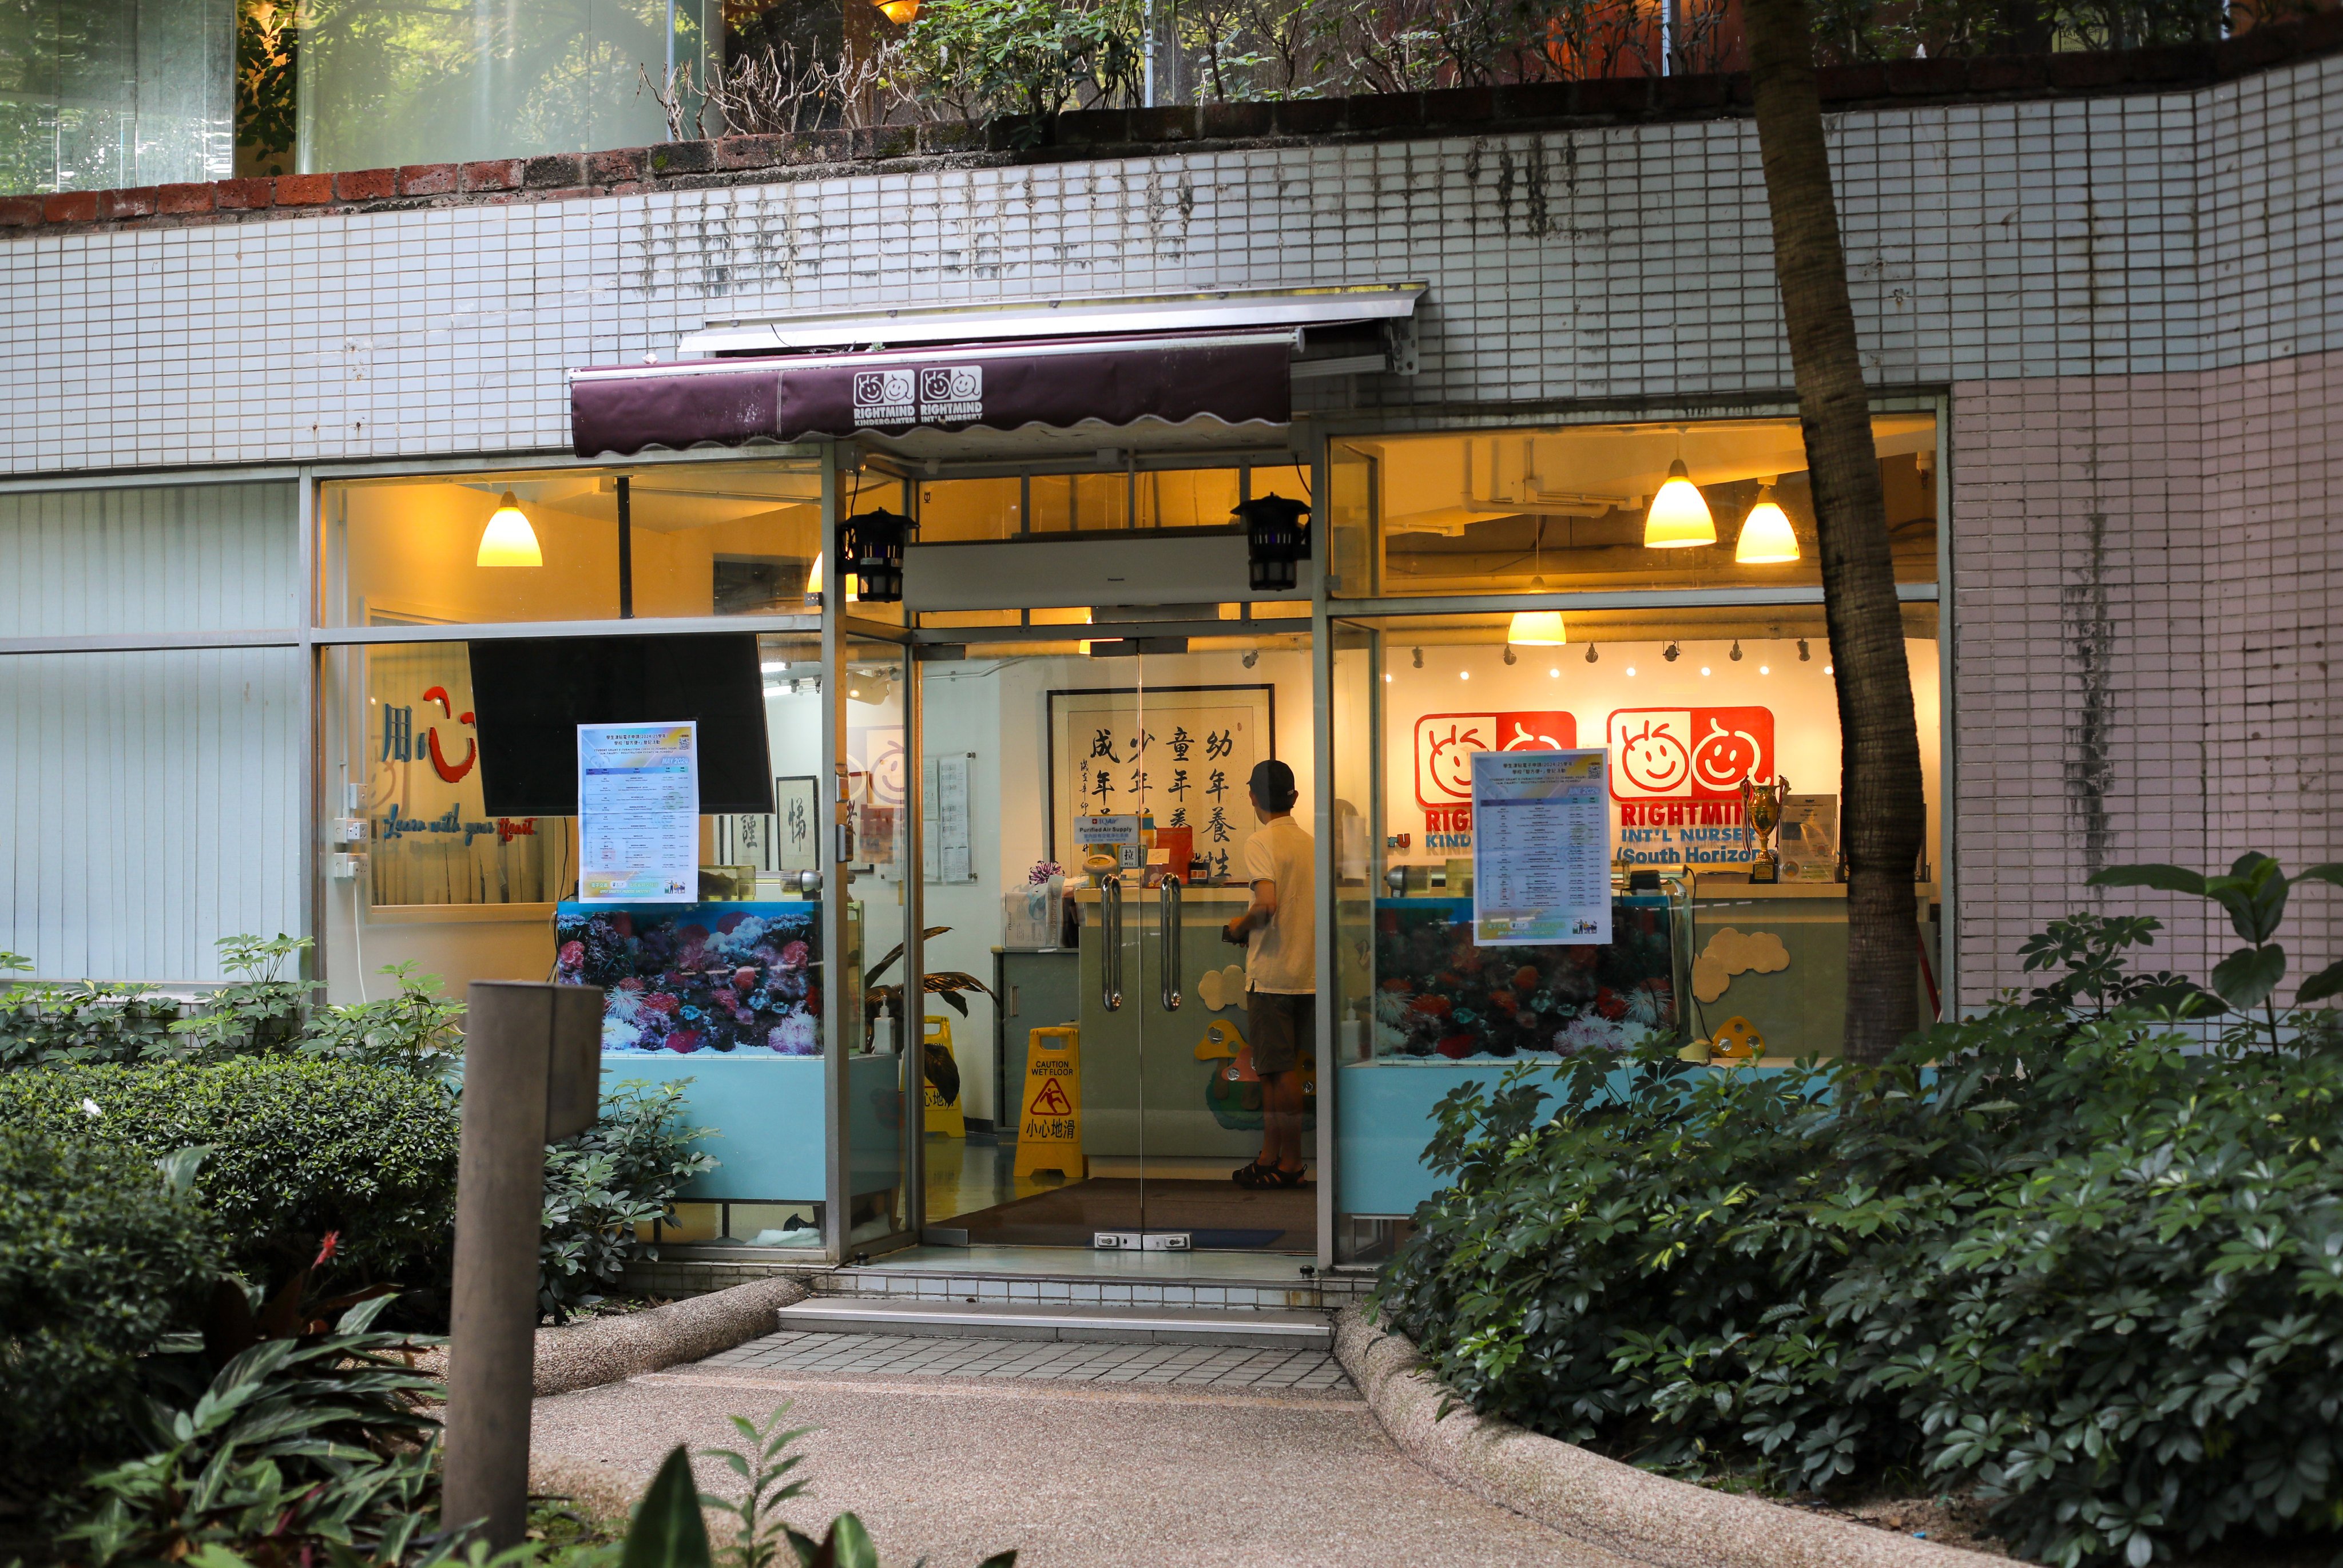 Rightmind Kindergarten had asked parents to contribute HK$23,000 per child into a ‘Capital Contribution Scheme’ which it said was to update campus facilities. Photo: Xiaomei Chen